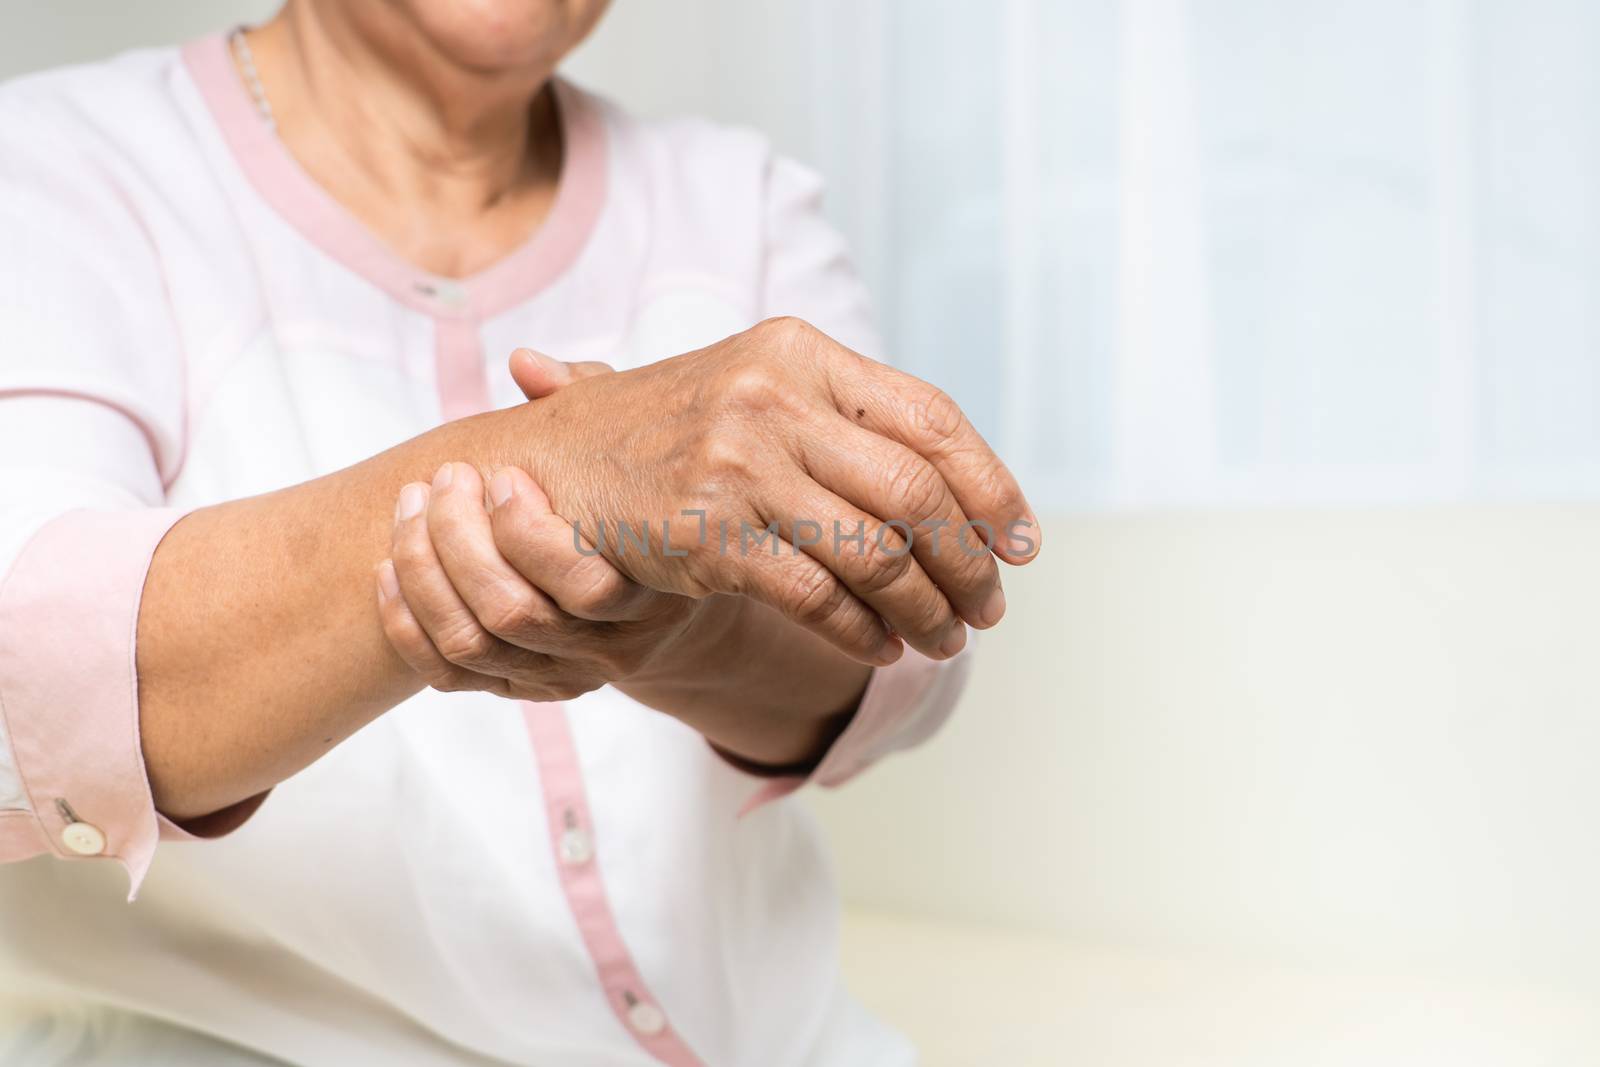 wrist hand pain of old woman, healthcare problem of senior concept